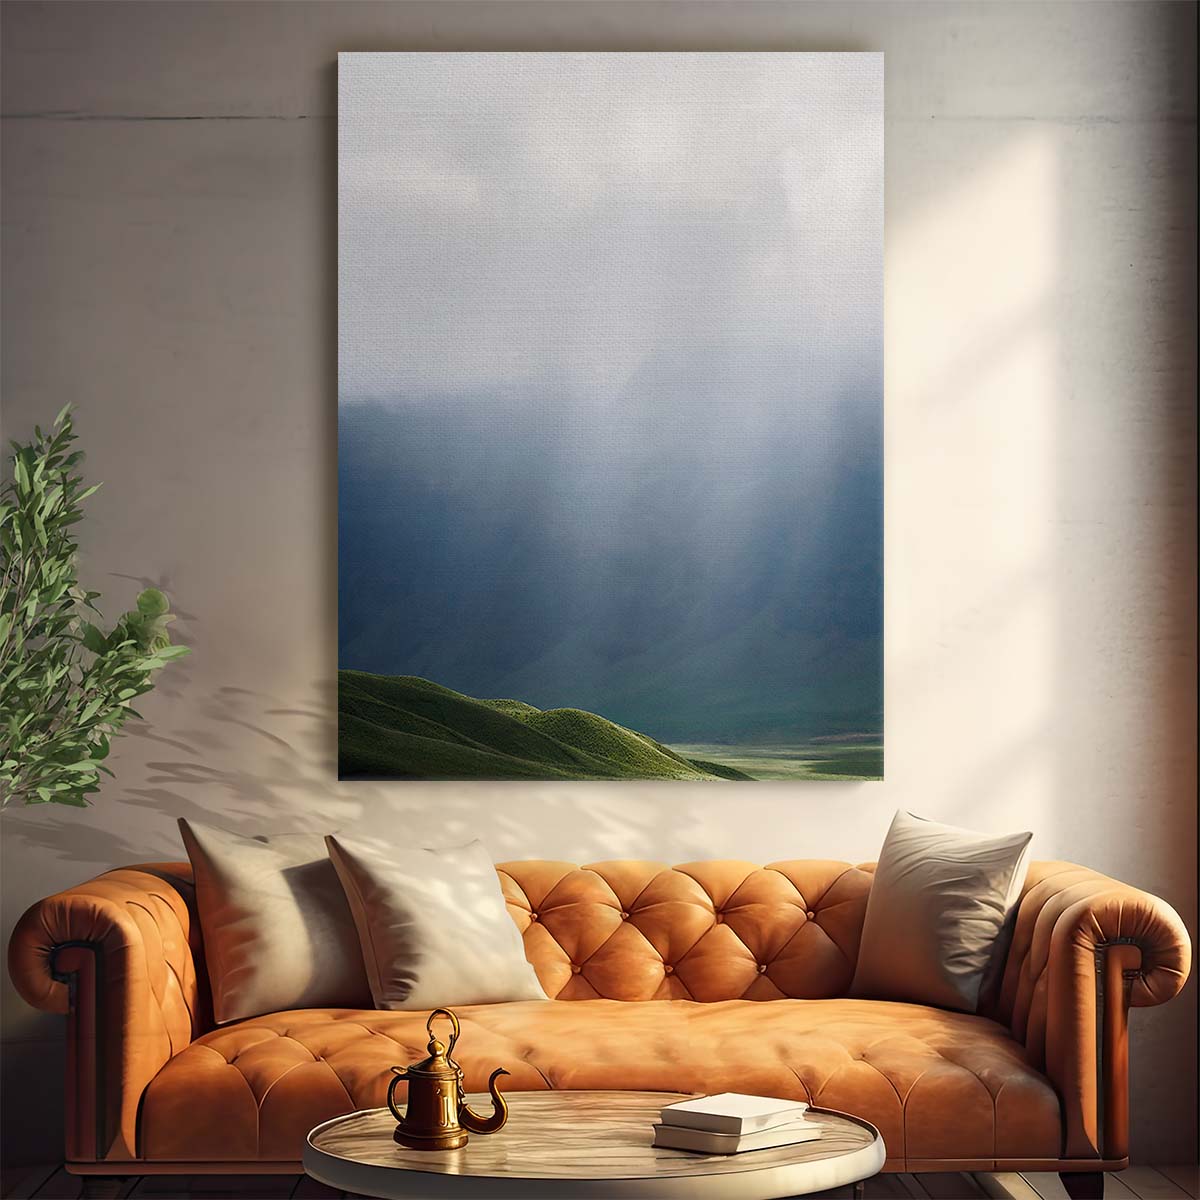 Indonesian Mountain Ridge Photography Foggy Landscape with Sunlit Rocks by Luxuriance Designs, made in USA